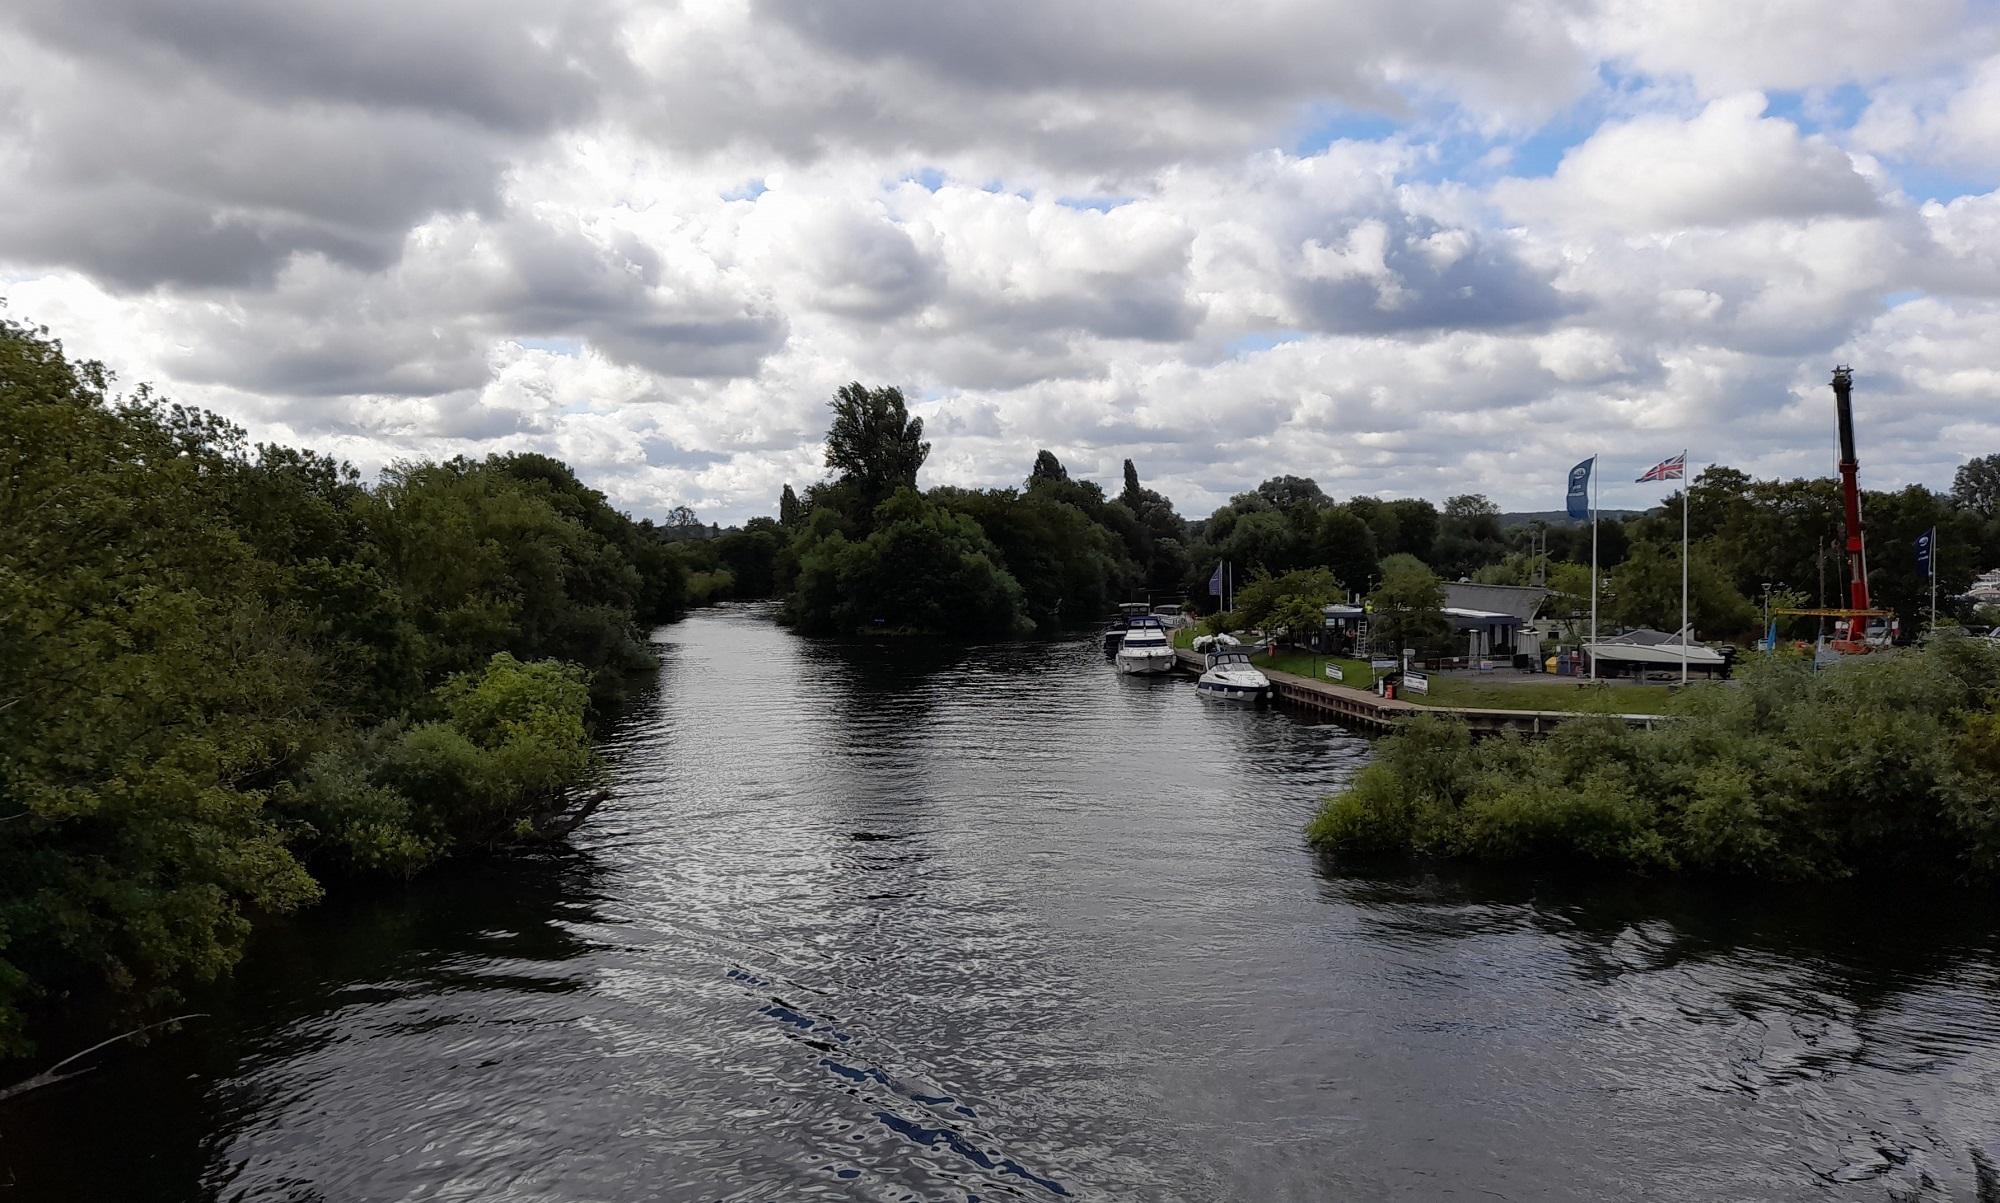 The River Thames: Queen’s Eyot and Bray Marina